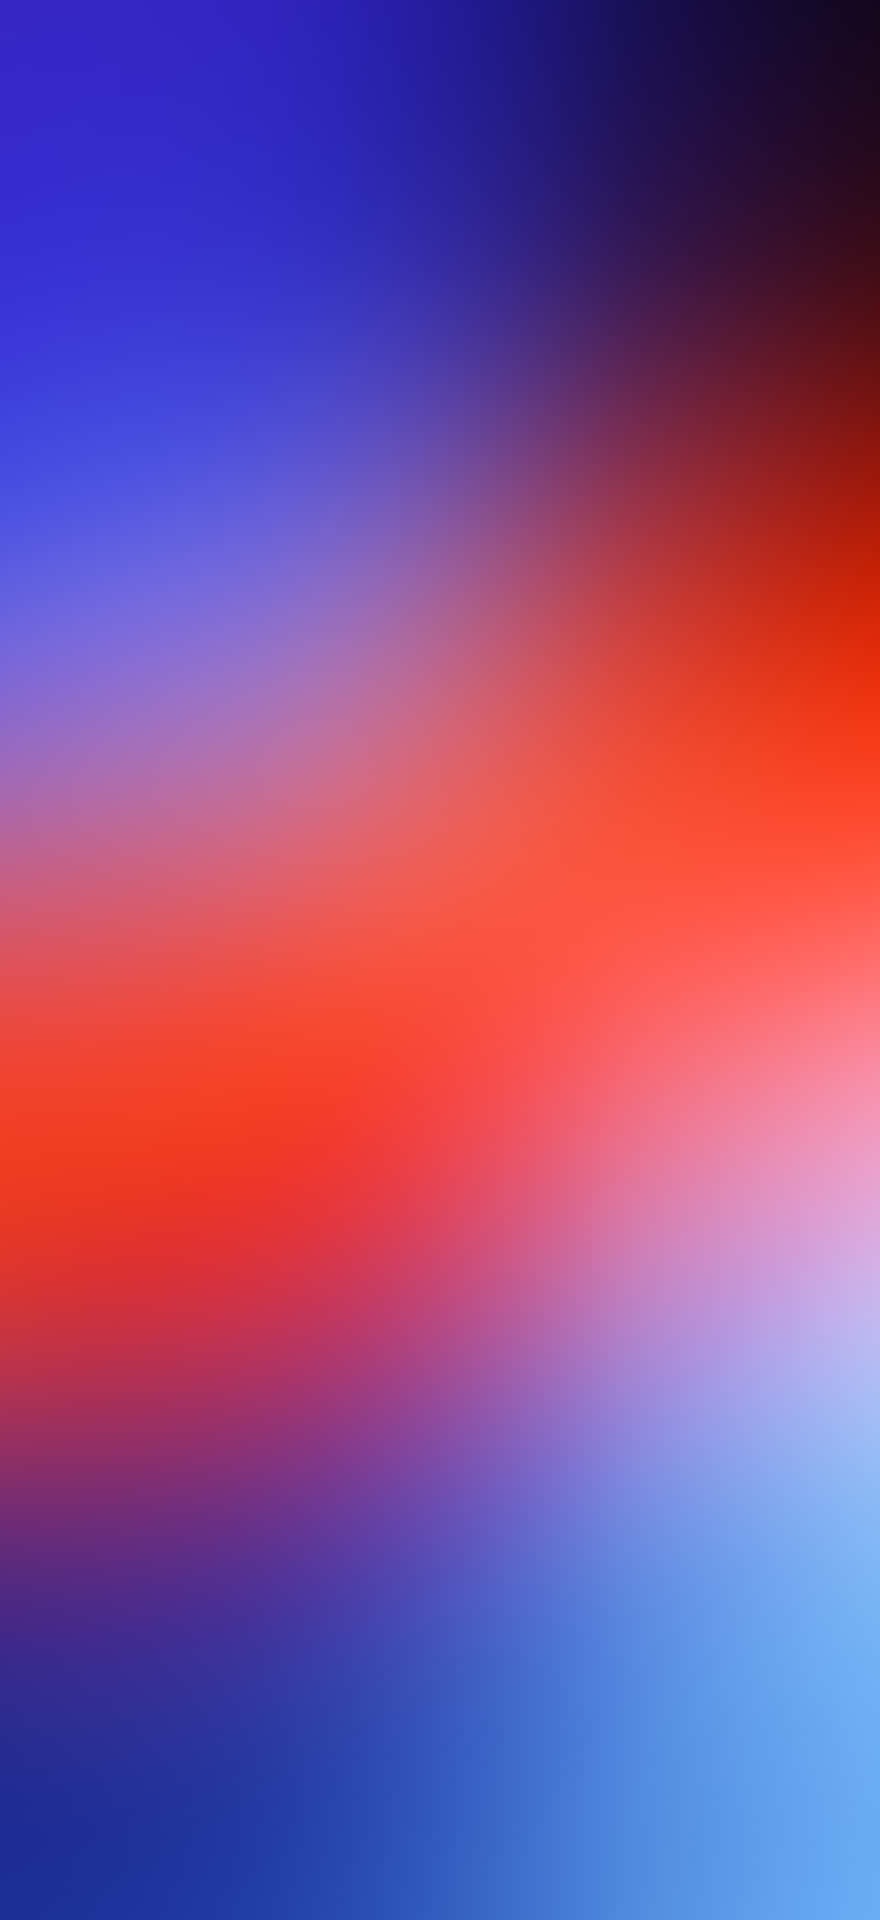 Download Red And Blue Iphone Wallpaper | Wallpapers.com